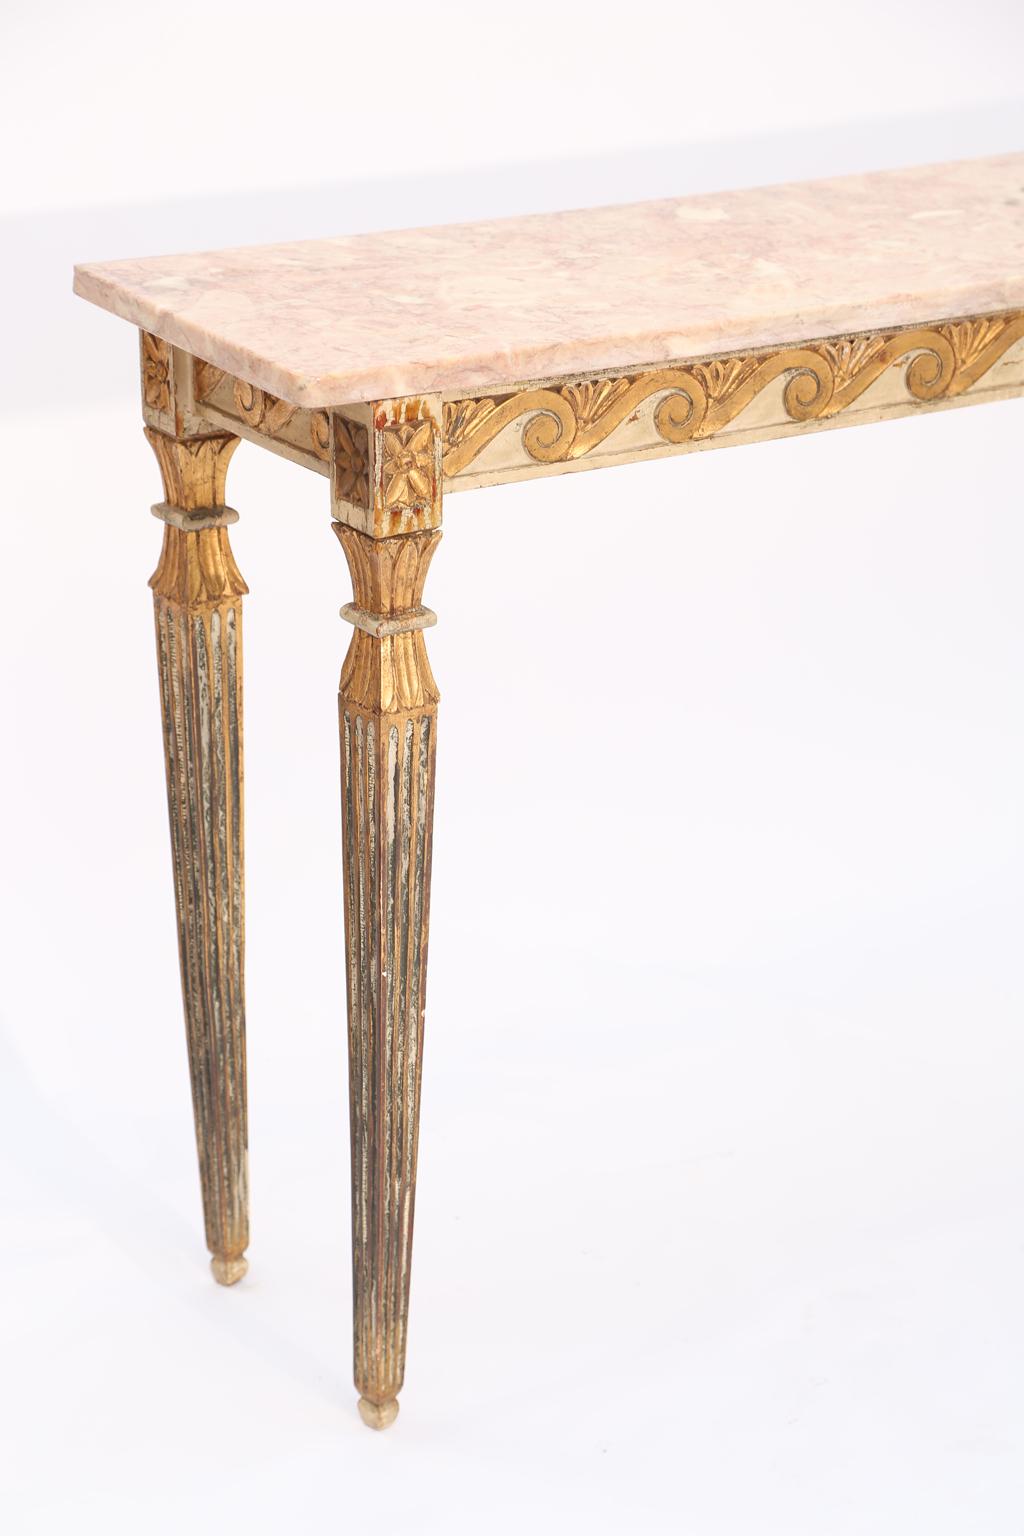 Hollywood Regency Long and Narrow Italian Parcel-Gilt Marble-Top Console with Scrolling Wave Apron